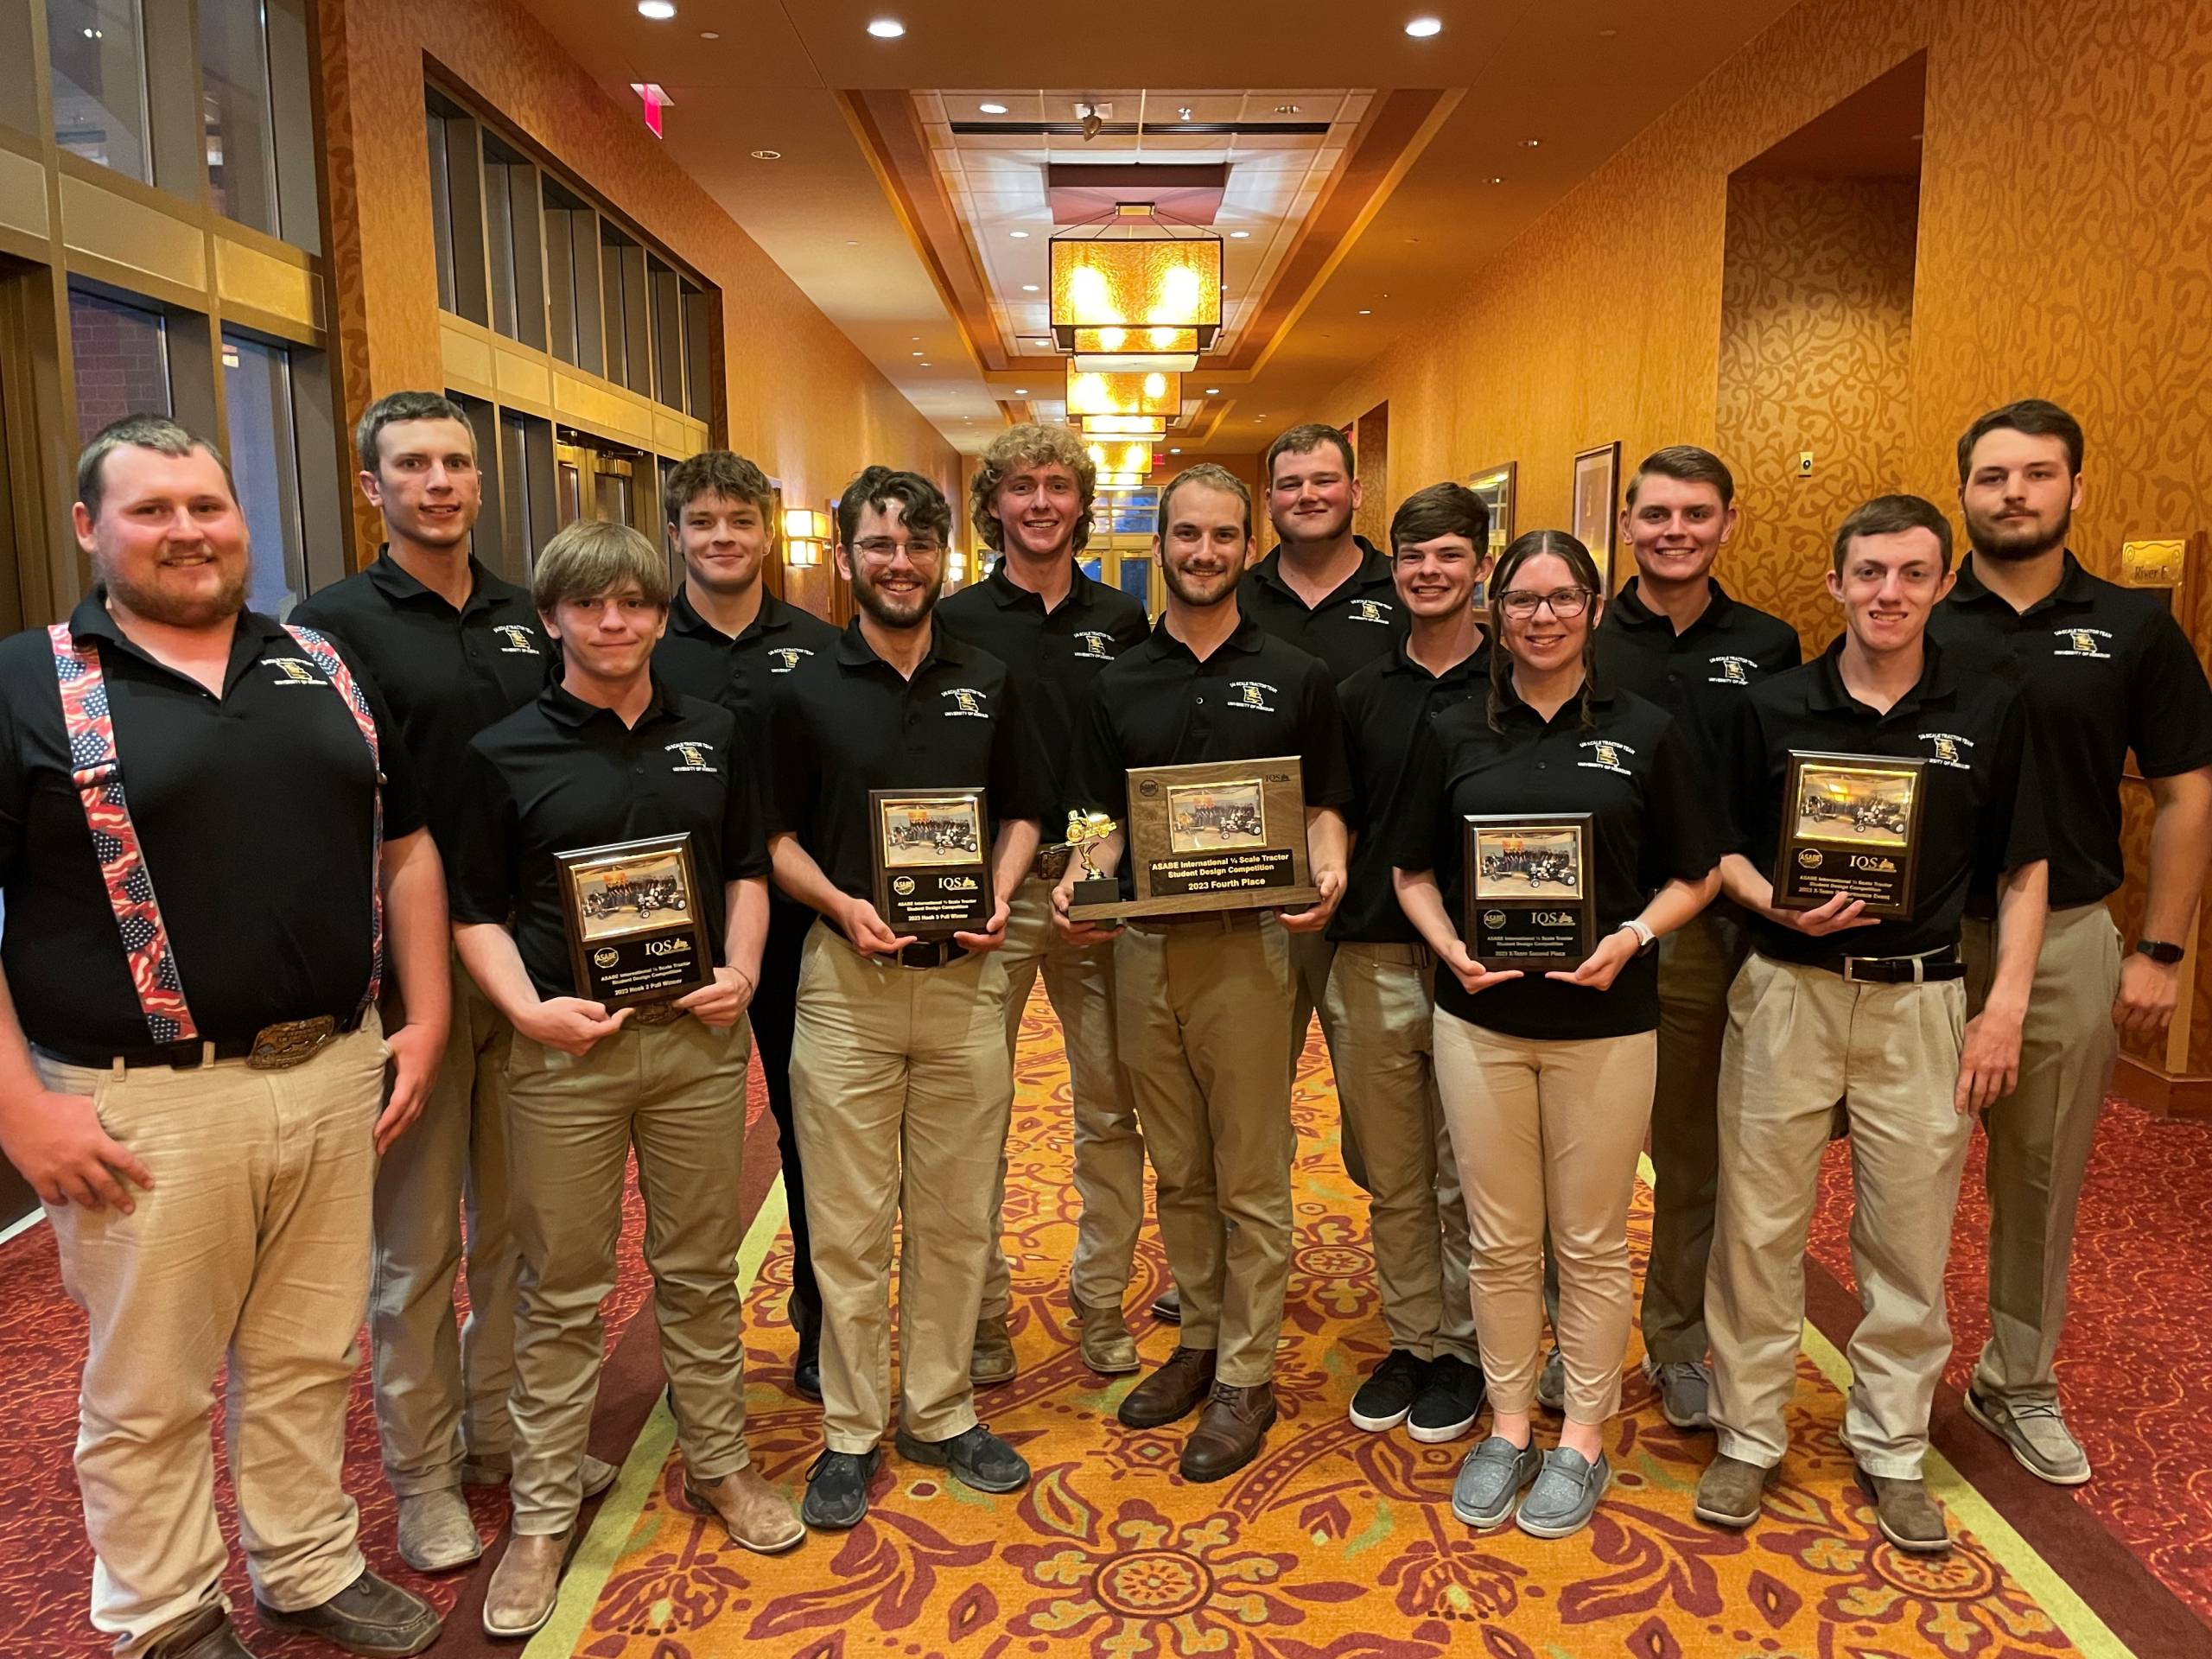 Torq’N Tigers Teams take 2nd and 5th places at ASABE Quarter-Scale Tractor Competition (click to read)